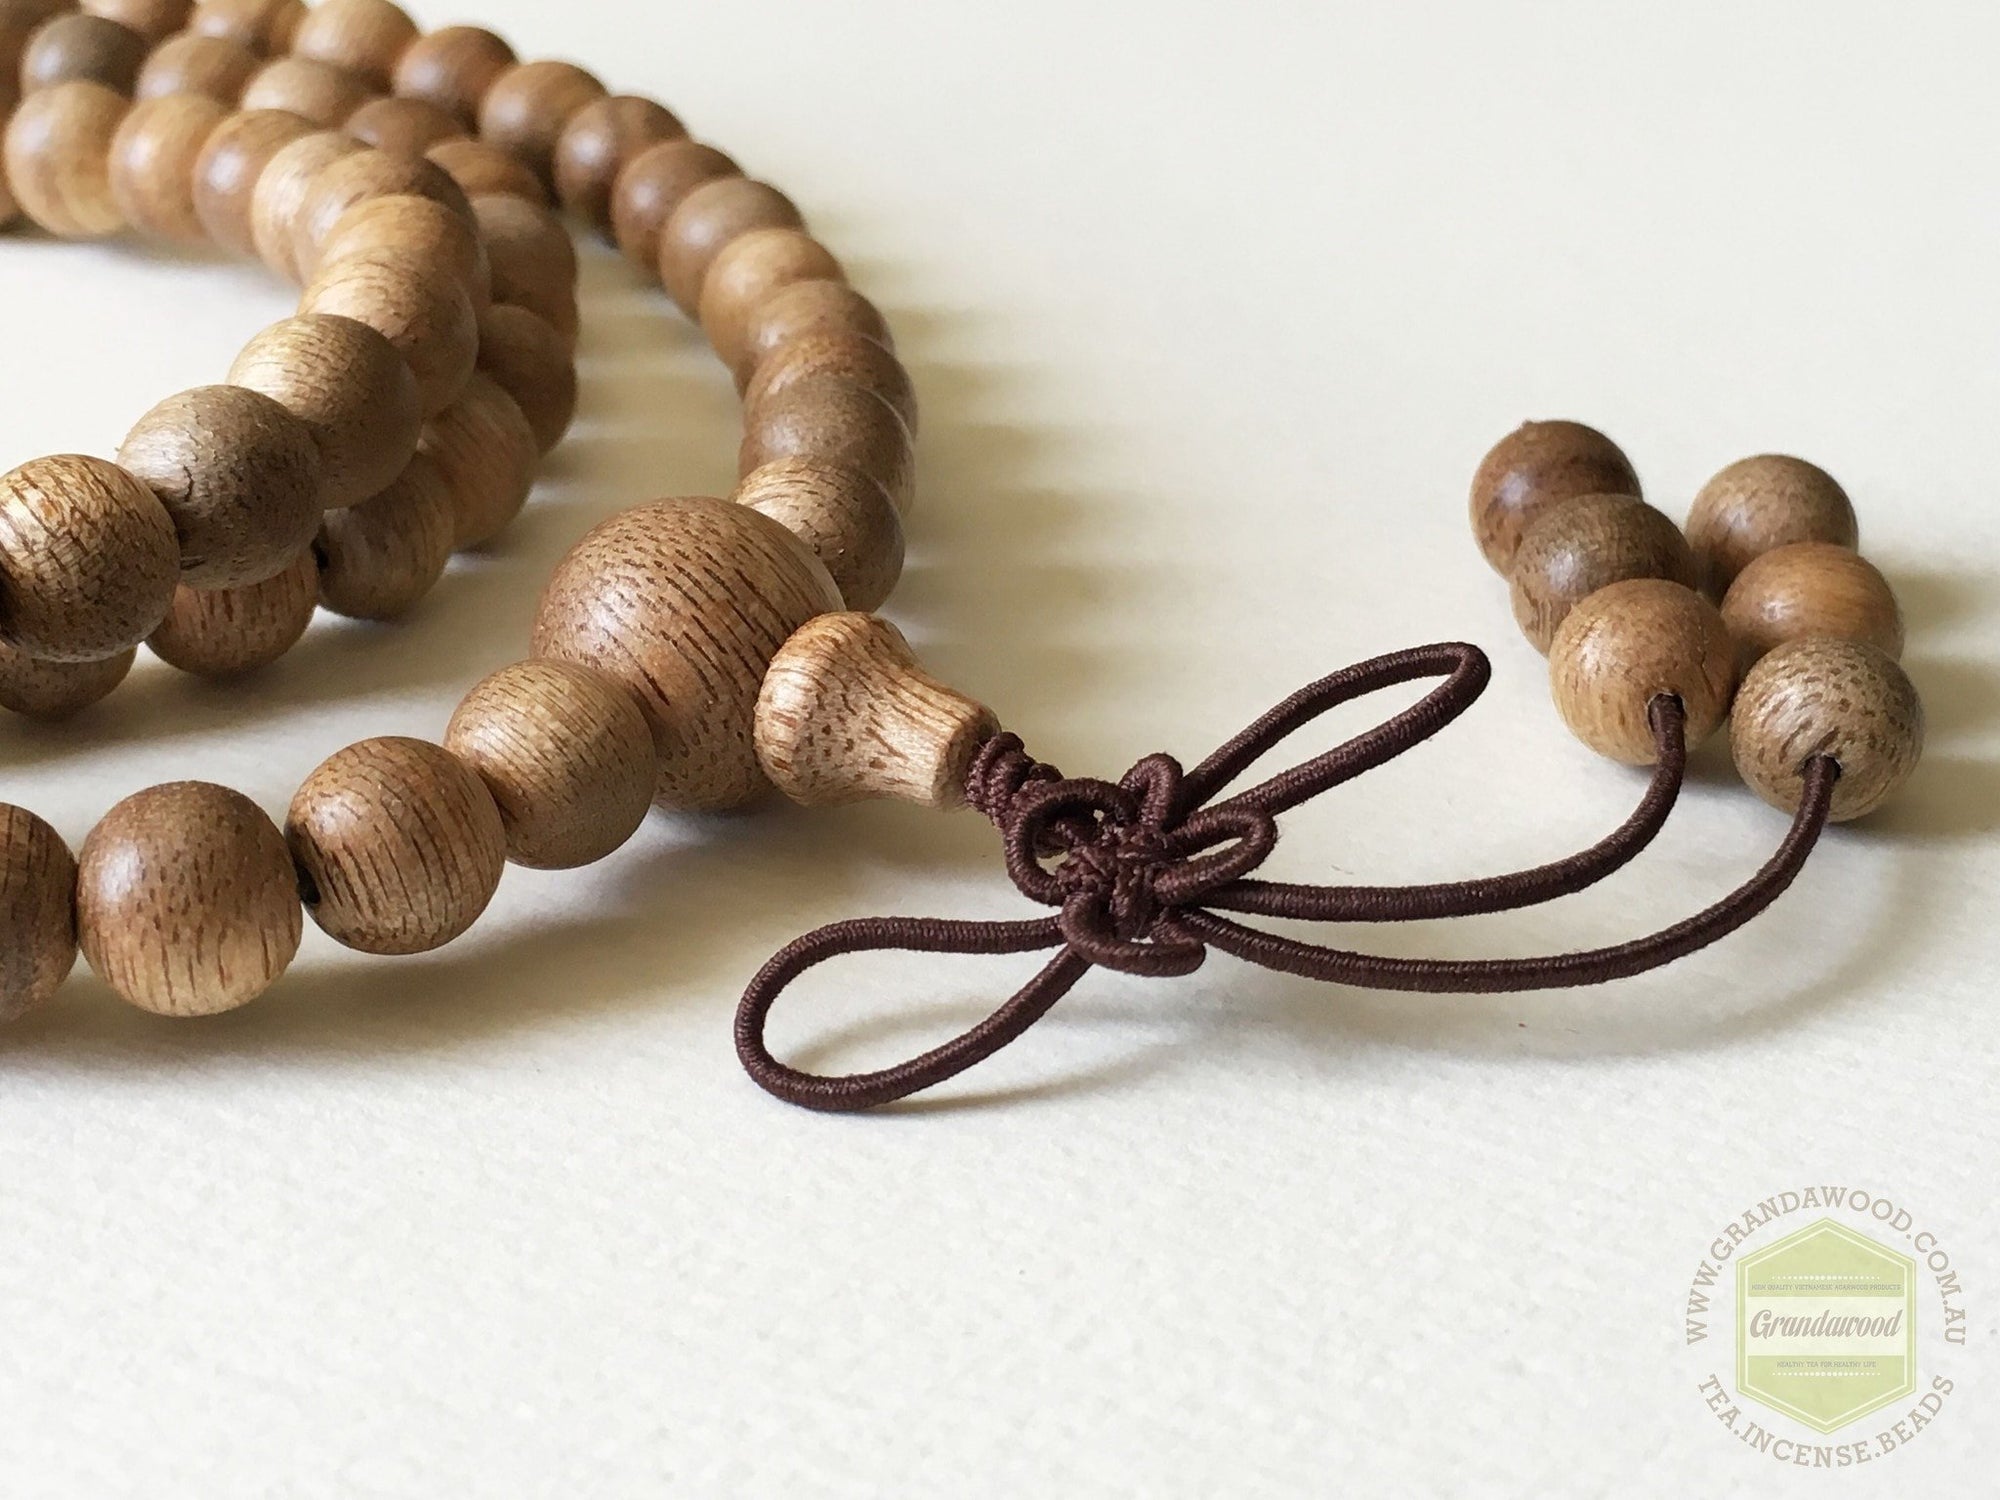 Young Vietnamese Cultivated Agarwood Mala beads 108 - Snake knot